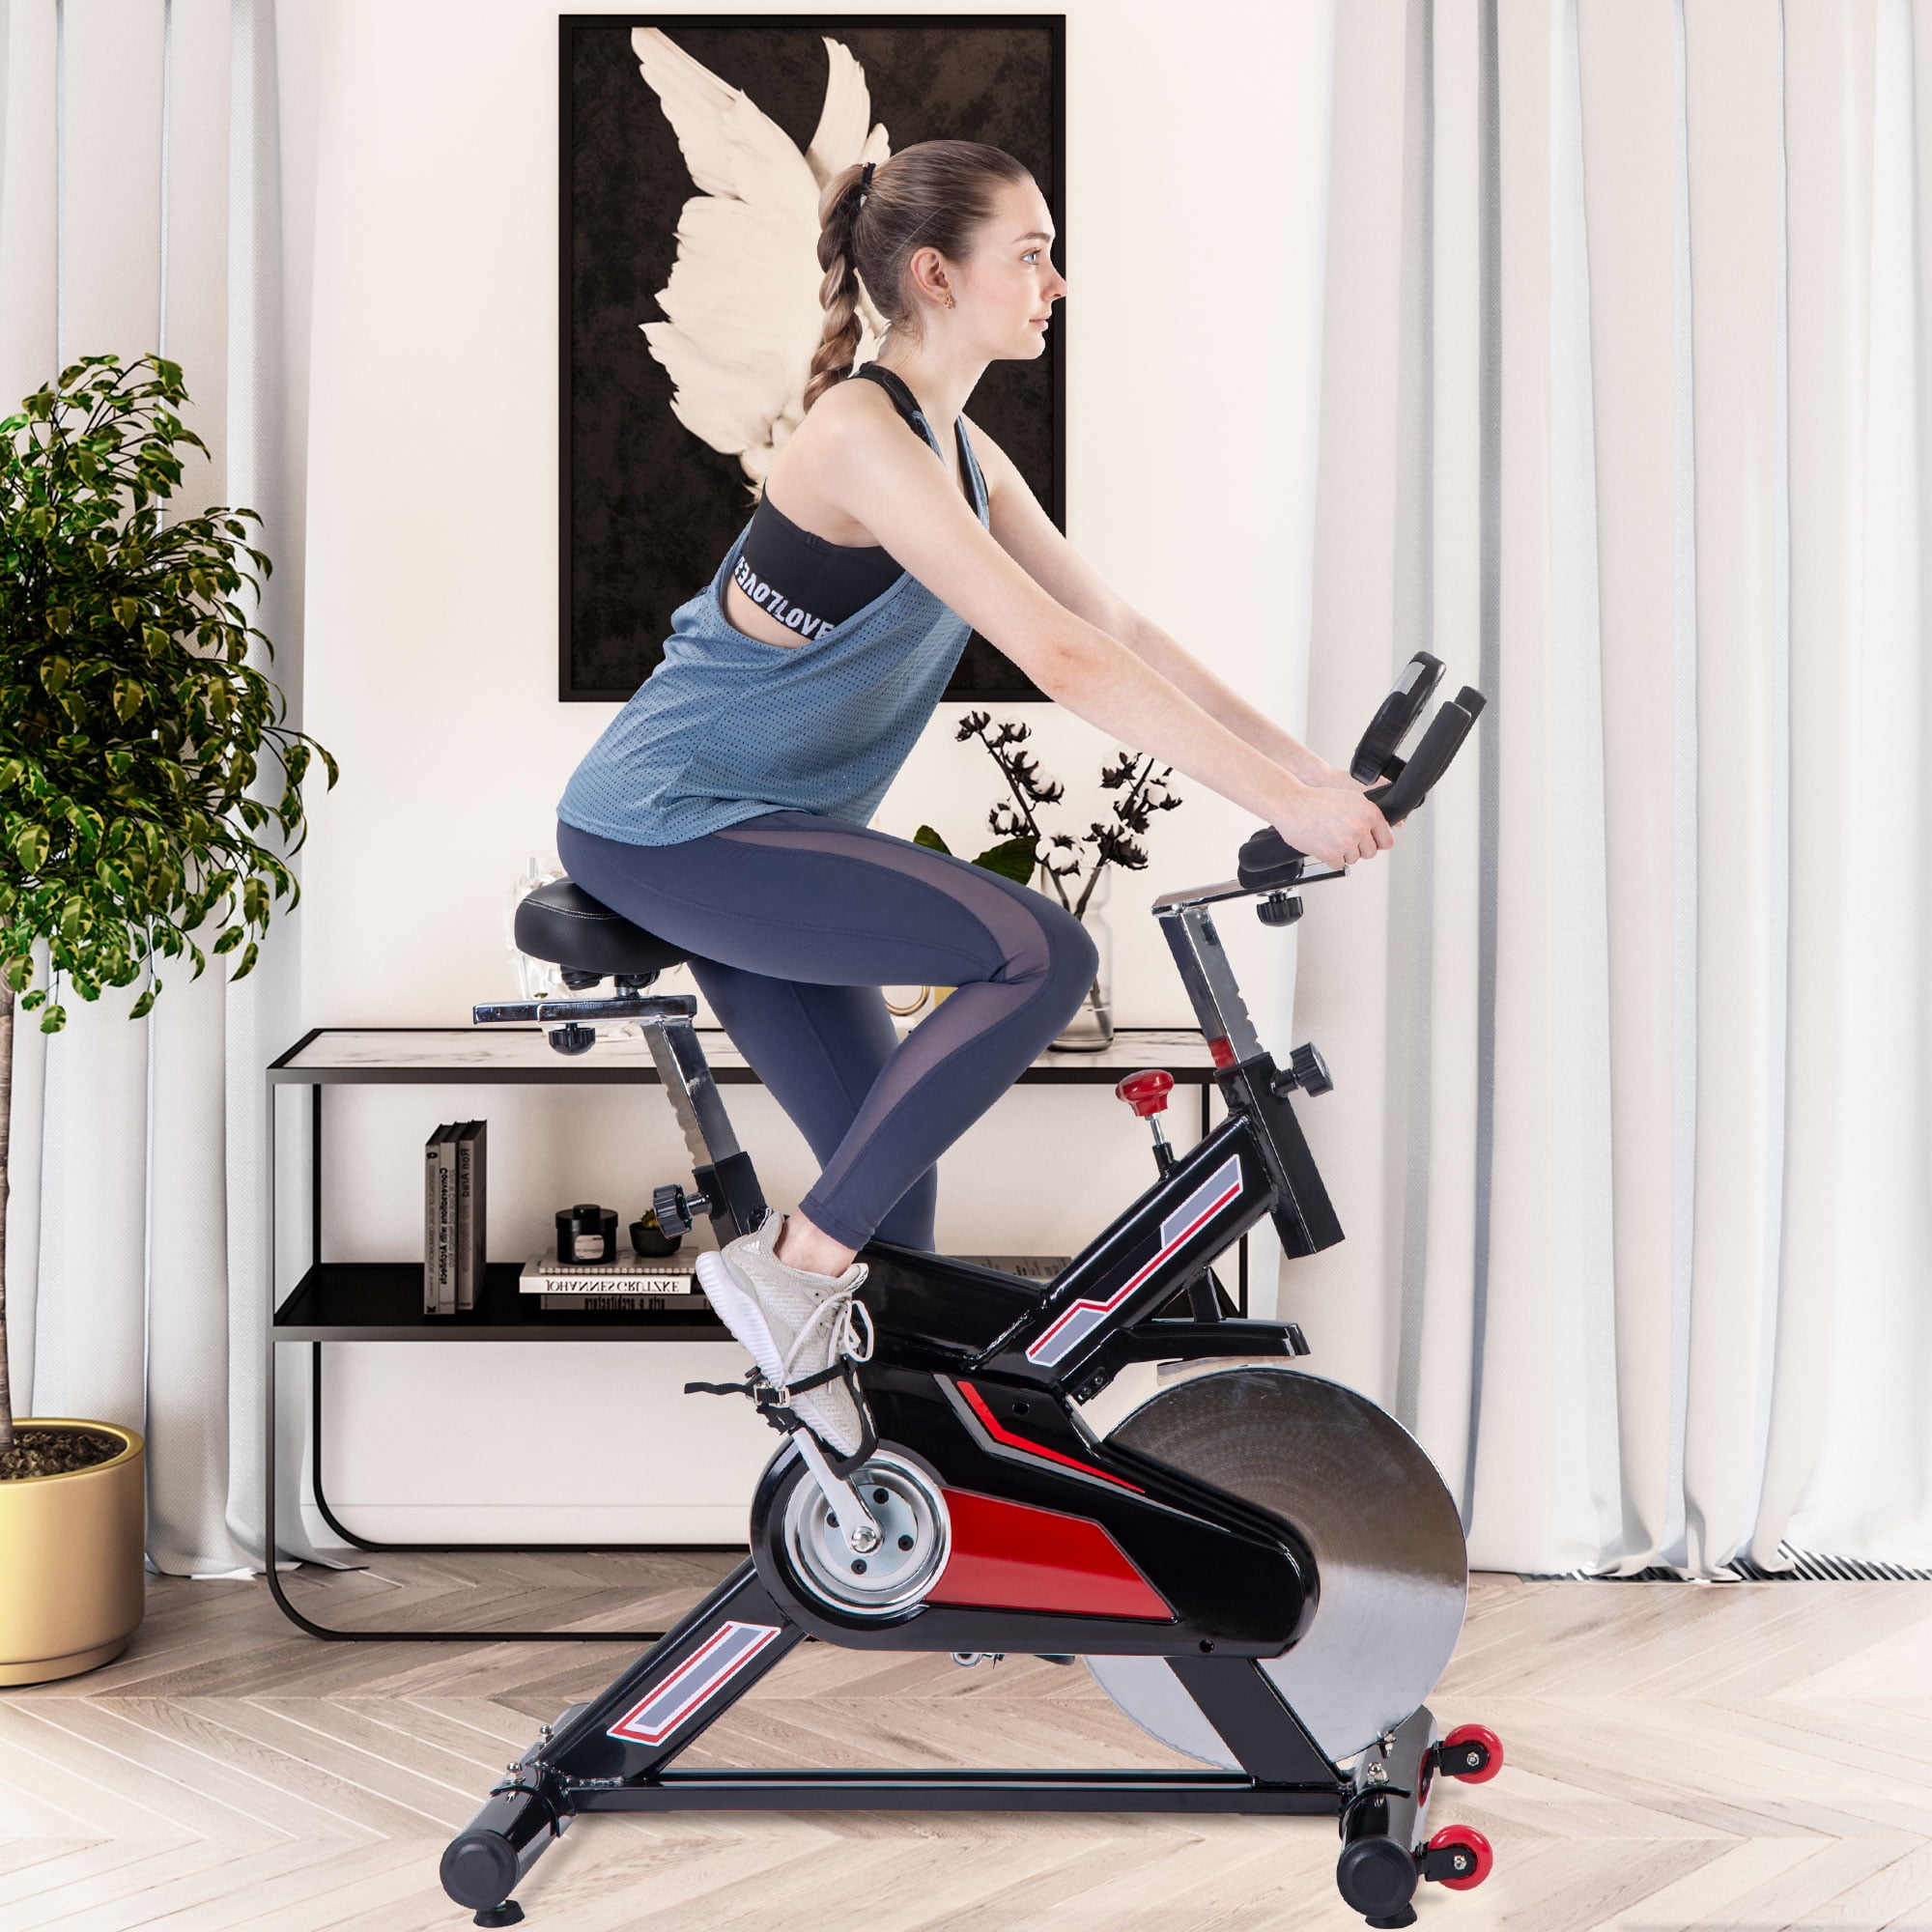 Super Quiet Exercise Bikes Home Gym Cycling Cardio  Fitness Training Fat Burning 